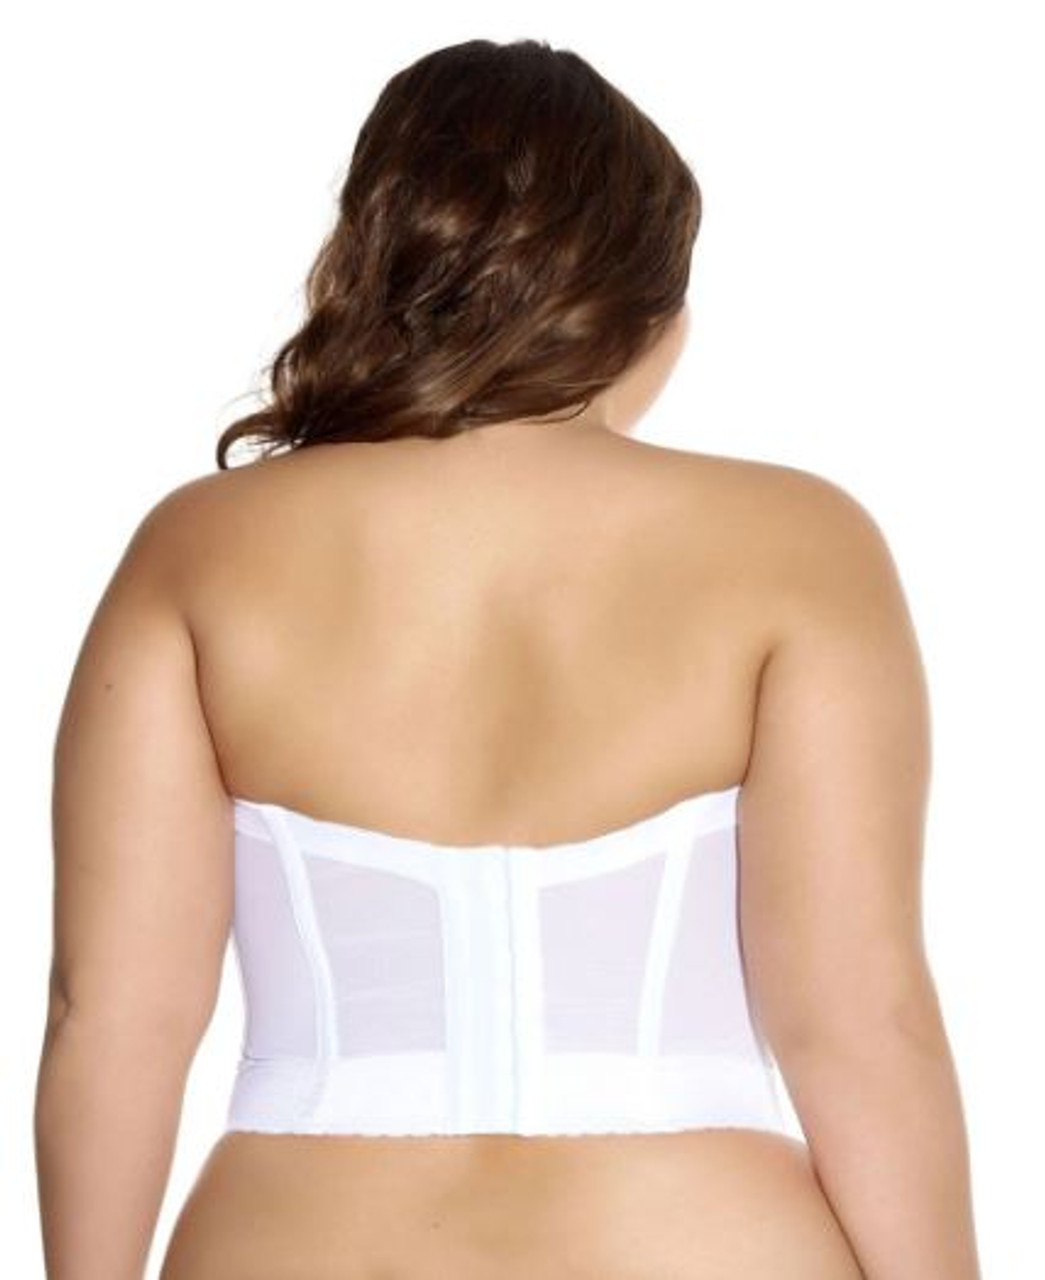 Goddess Lace Bridal Bustier in White - Busted Bra Shop